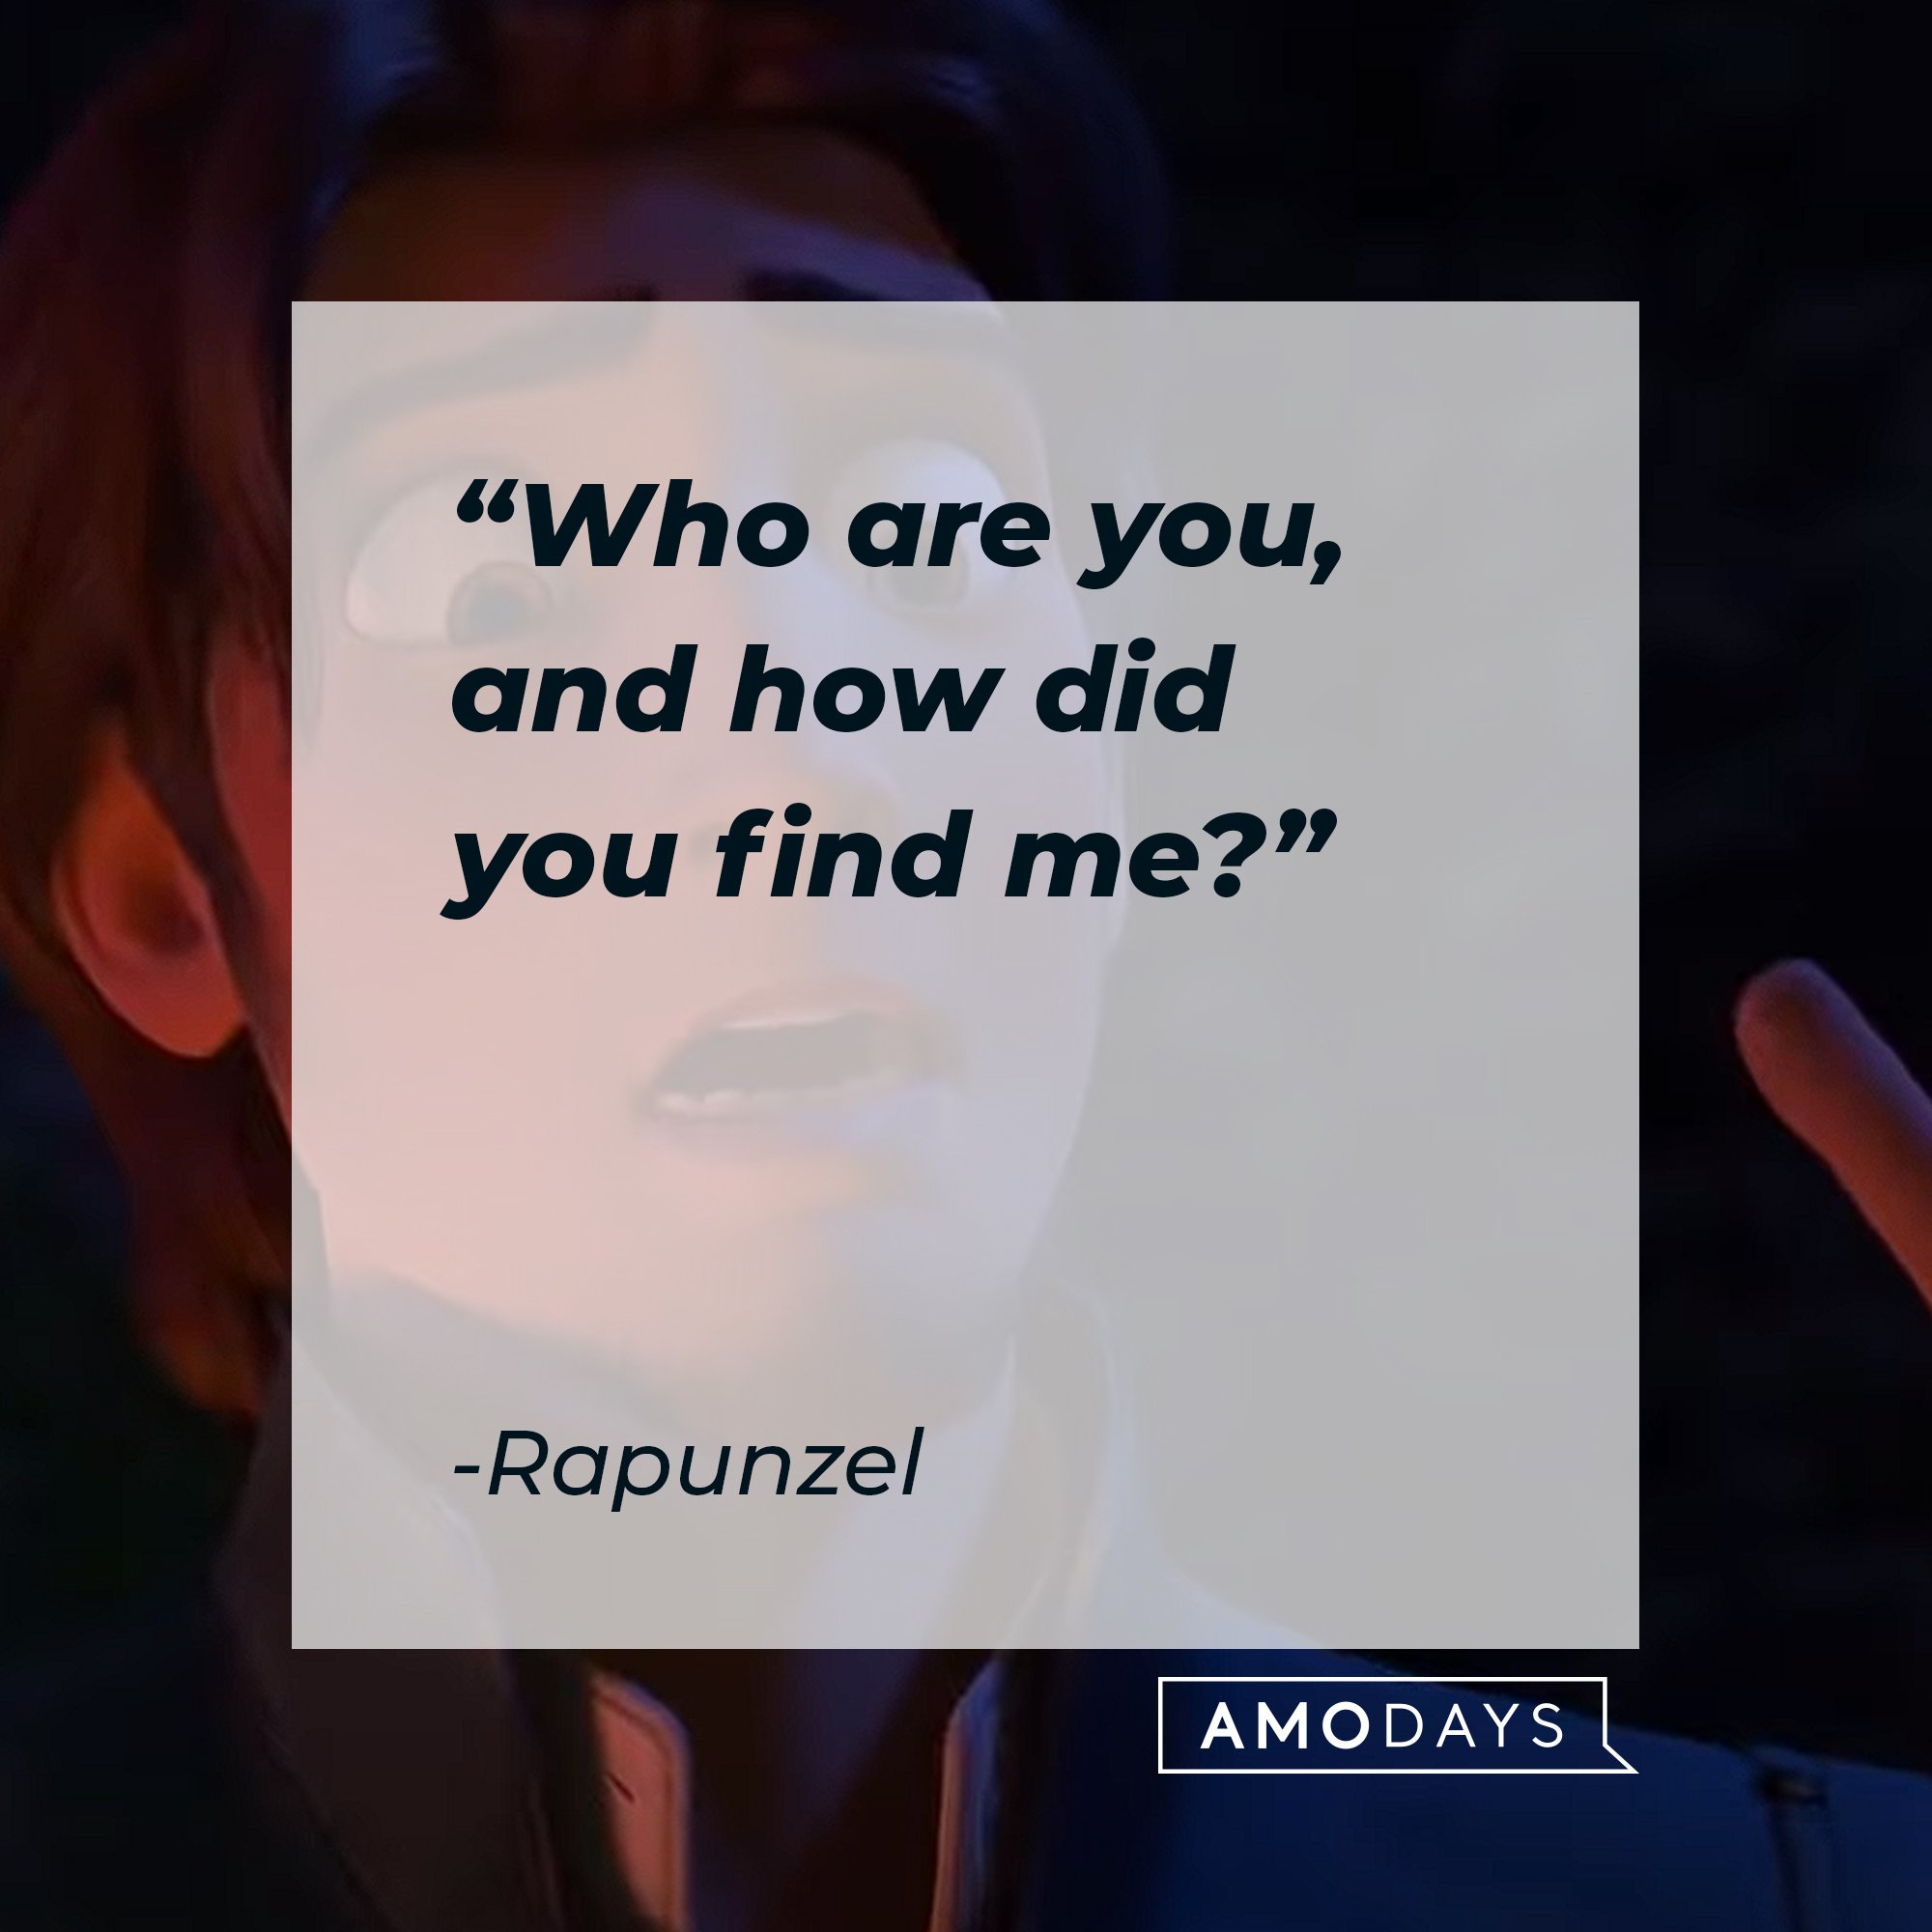 Rapunzel's quote: "Who are you, and how did you find me?" | Image: AmoDays